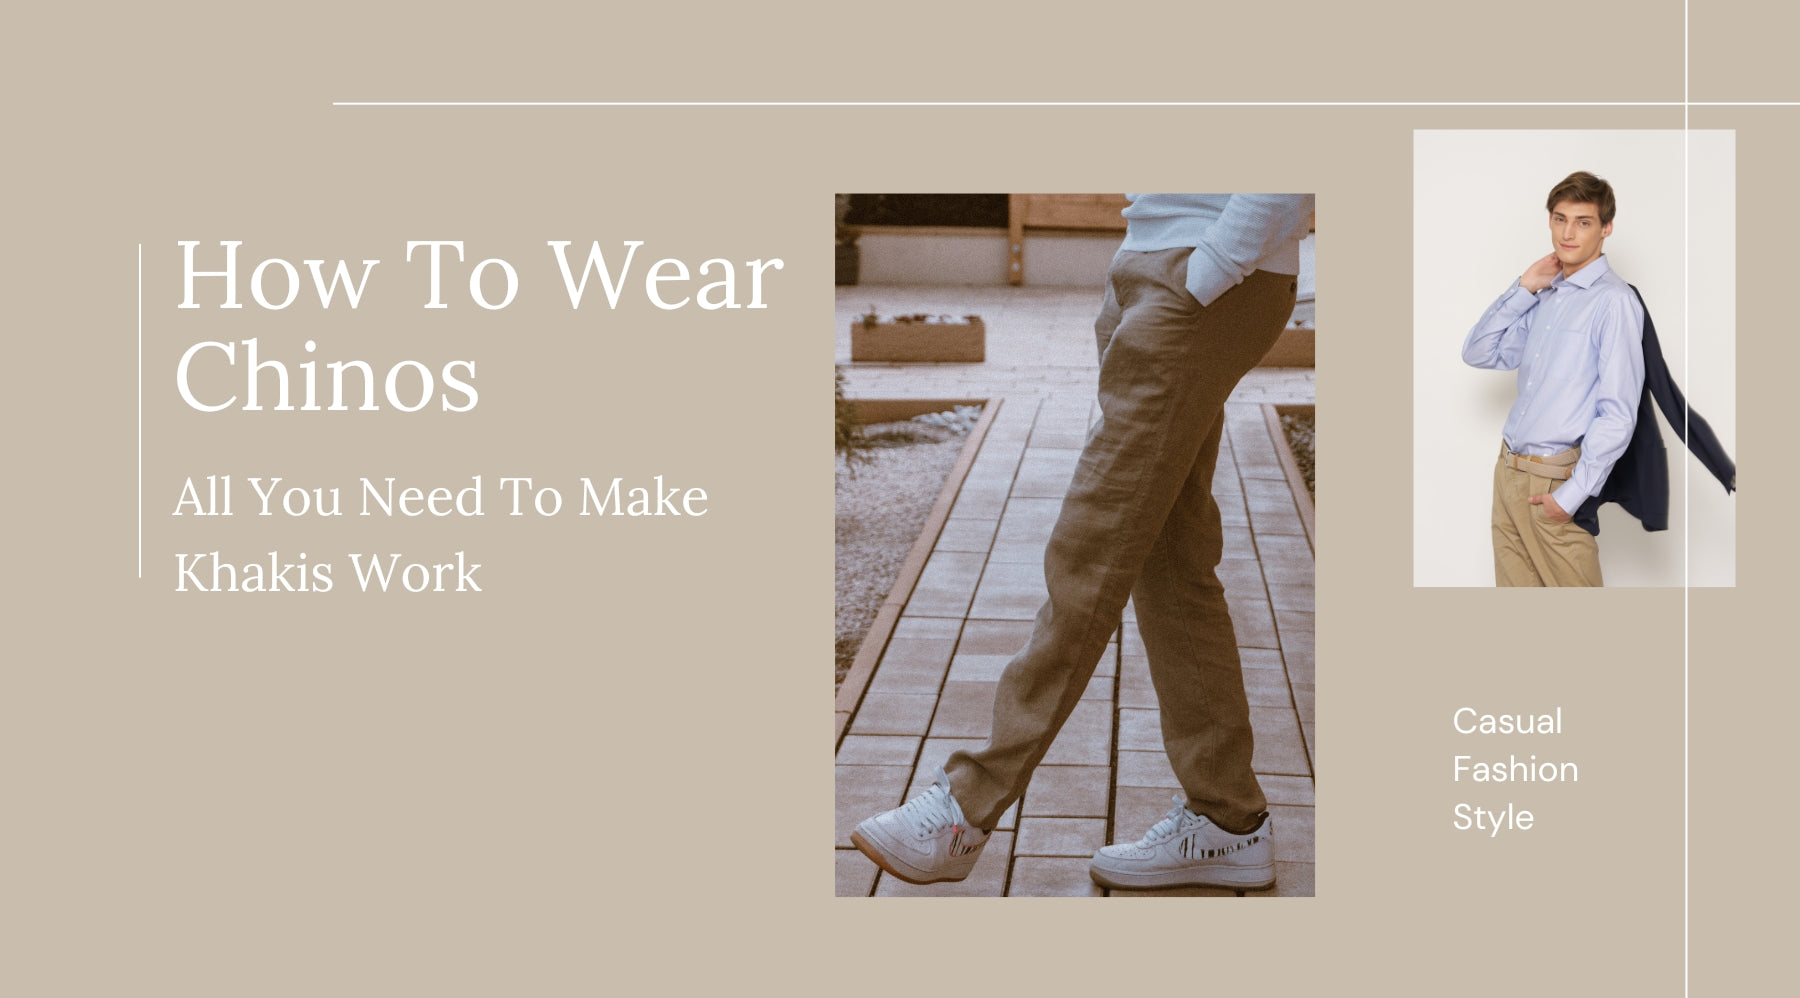 How To Wear Chinos: All You Need To Make Khakis Work | Branded10